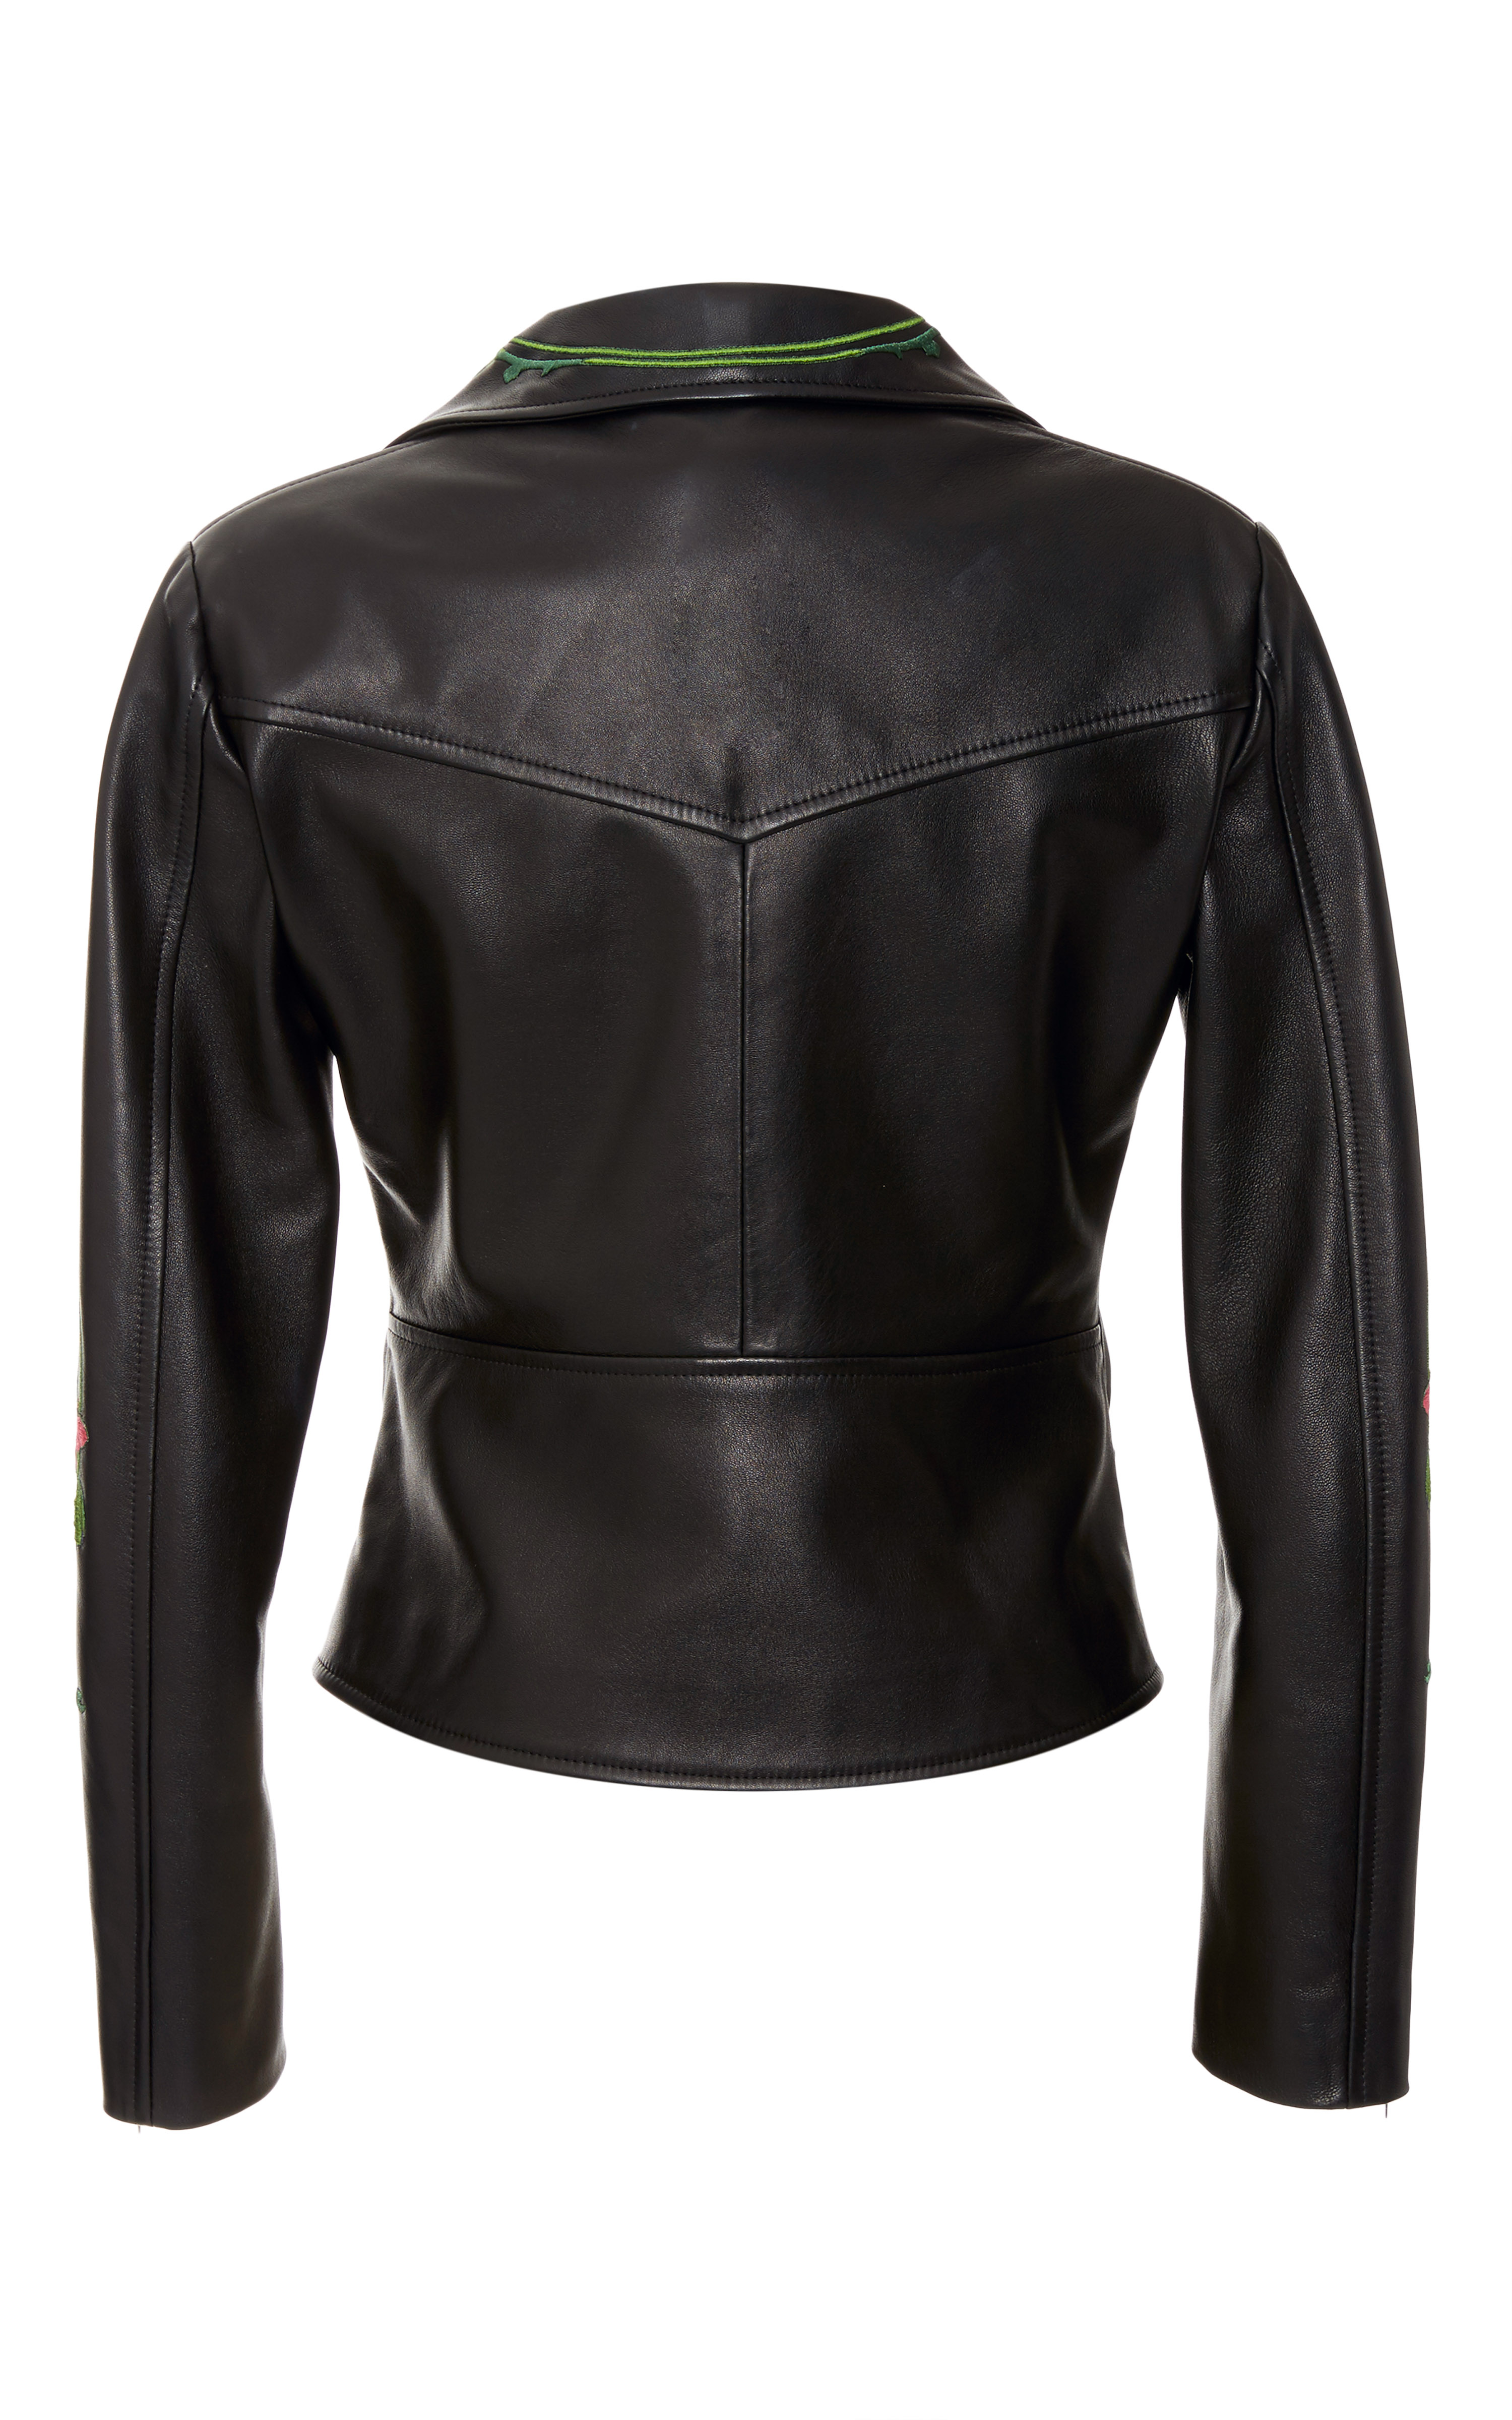 Christopher Kane Floral Embroidered Leather Jacket in Black - Lyst